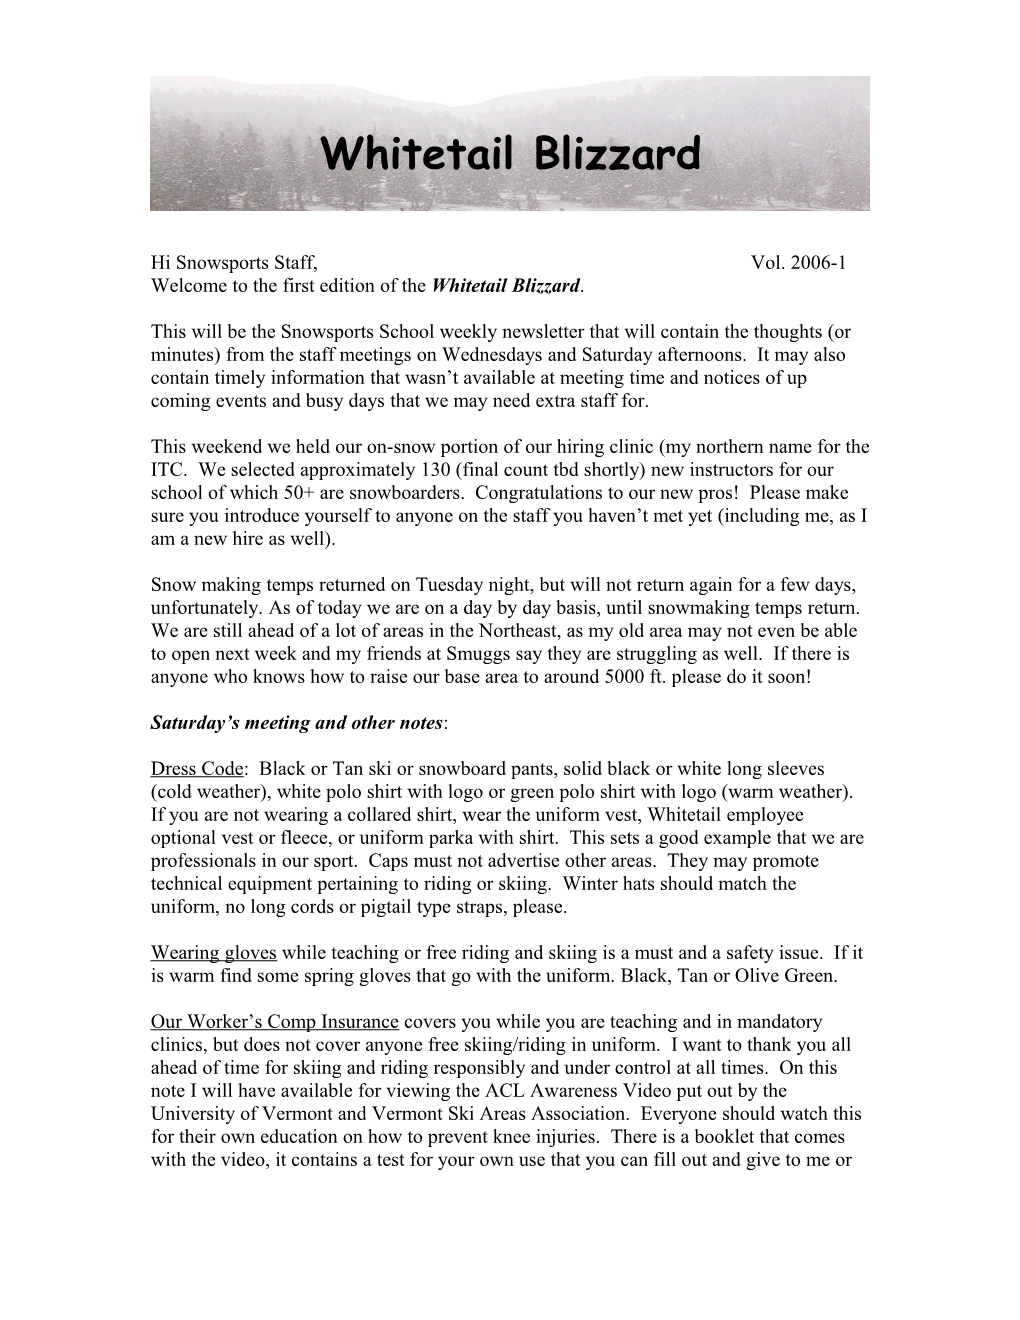 Welcome to the First Edition of the Whitetail Blizzard